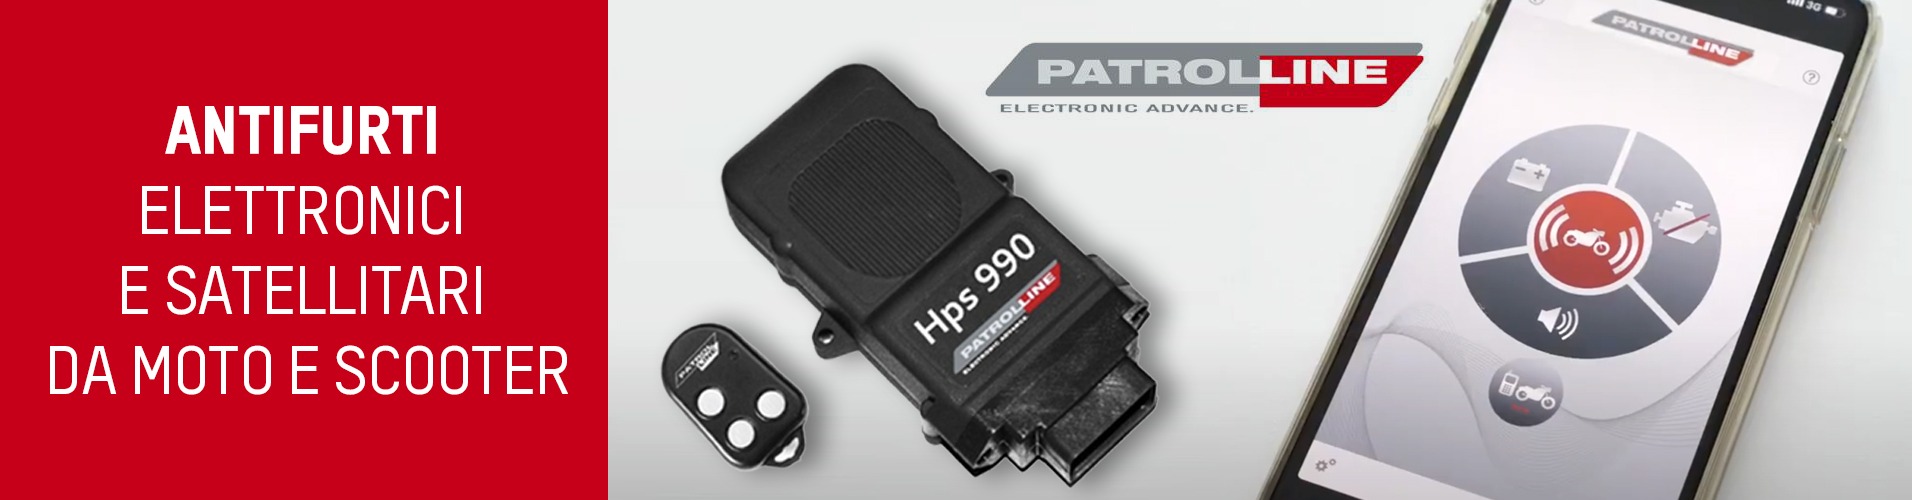 Electronic and satellite anti-theft devices from motorcycles and scooters: the collaboration with Patrol Line